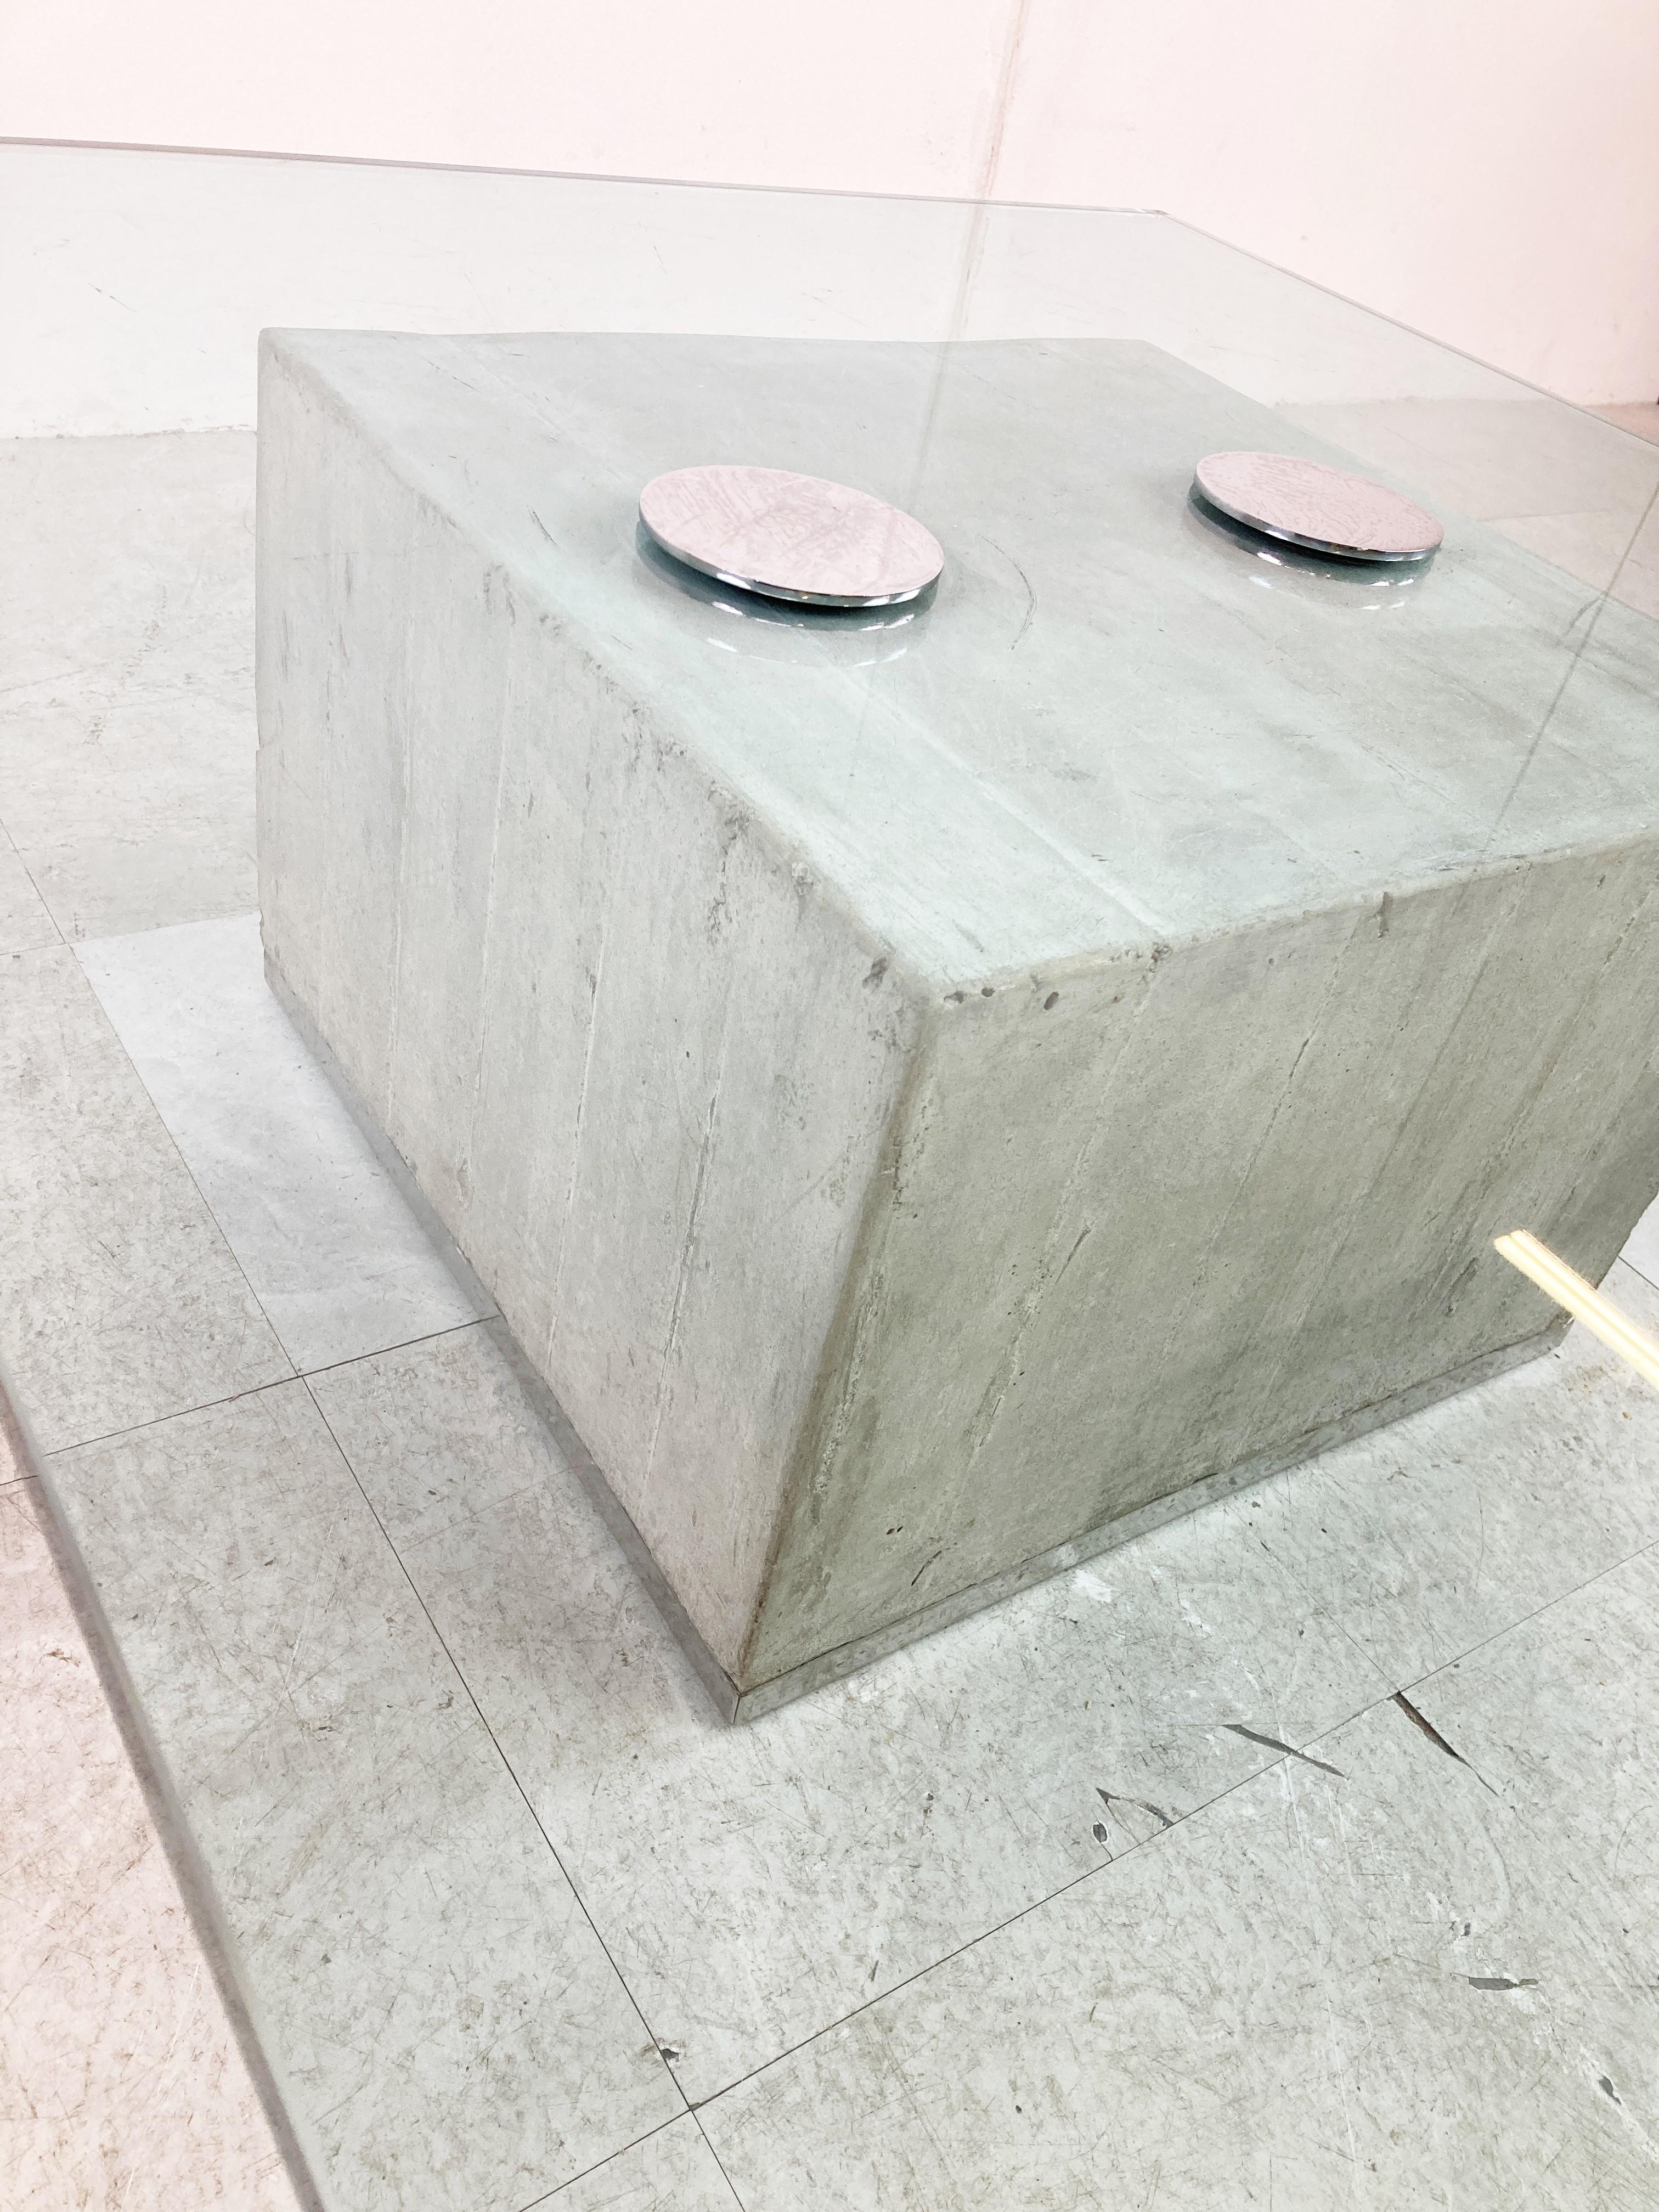 Concrete and chrome coffee table with thick glass top. - Model Sapo.

Designed by Sergio and Giorgio Saporiti for Saporiti.

This concrete coffee table is a beautiful eye catcher and unique thanks to the not centered table base. 

The top is